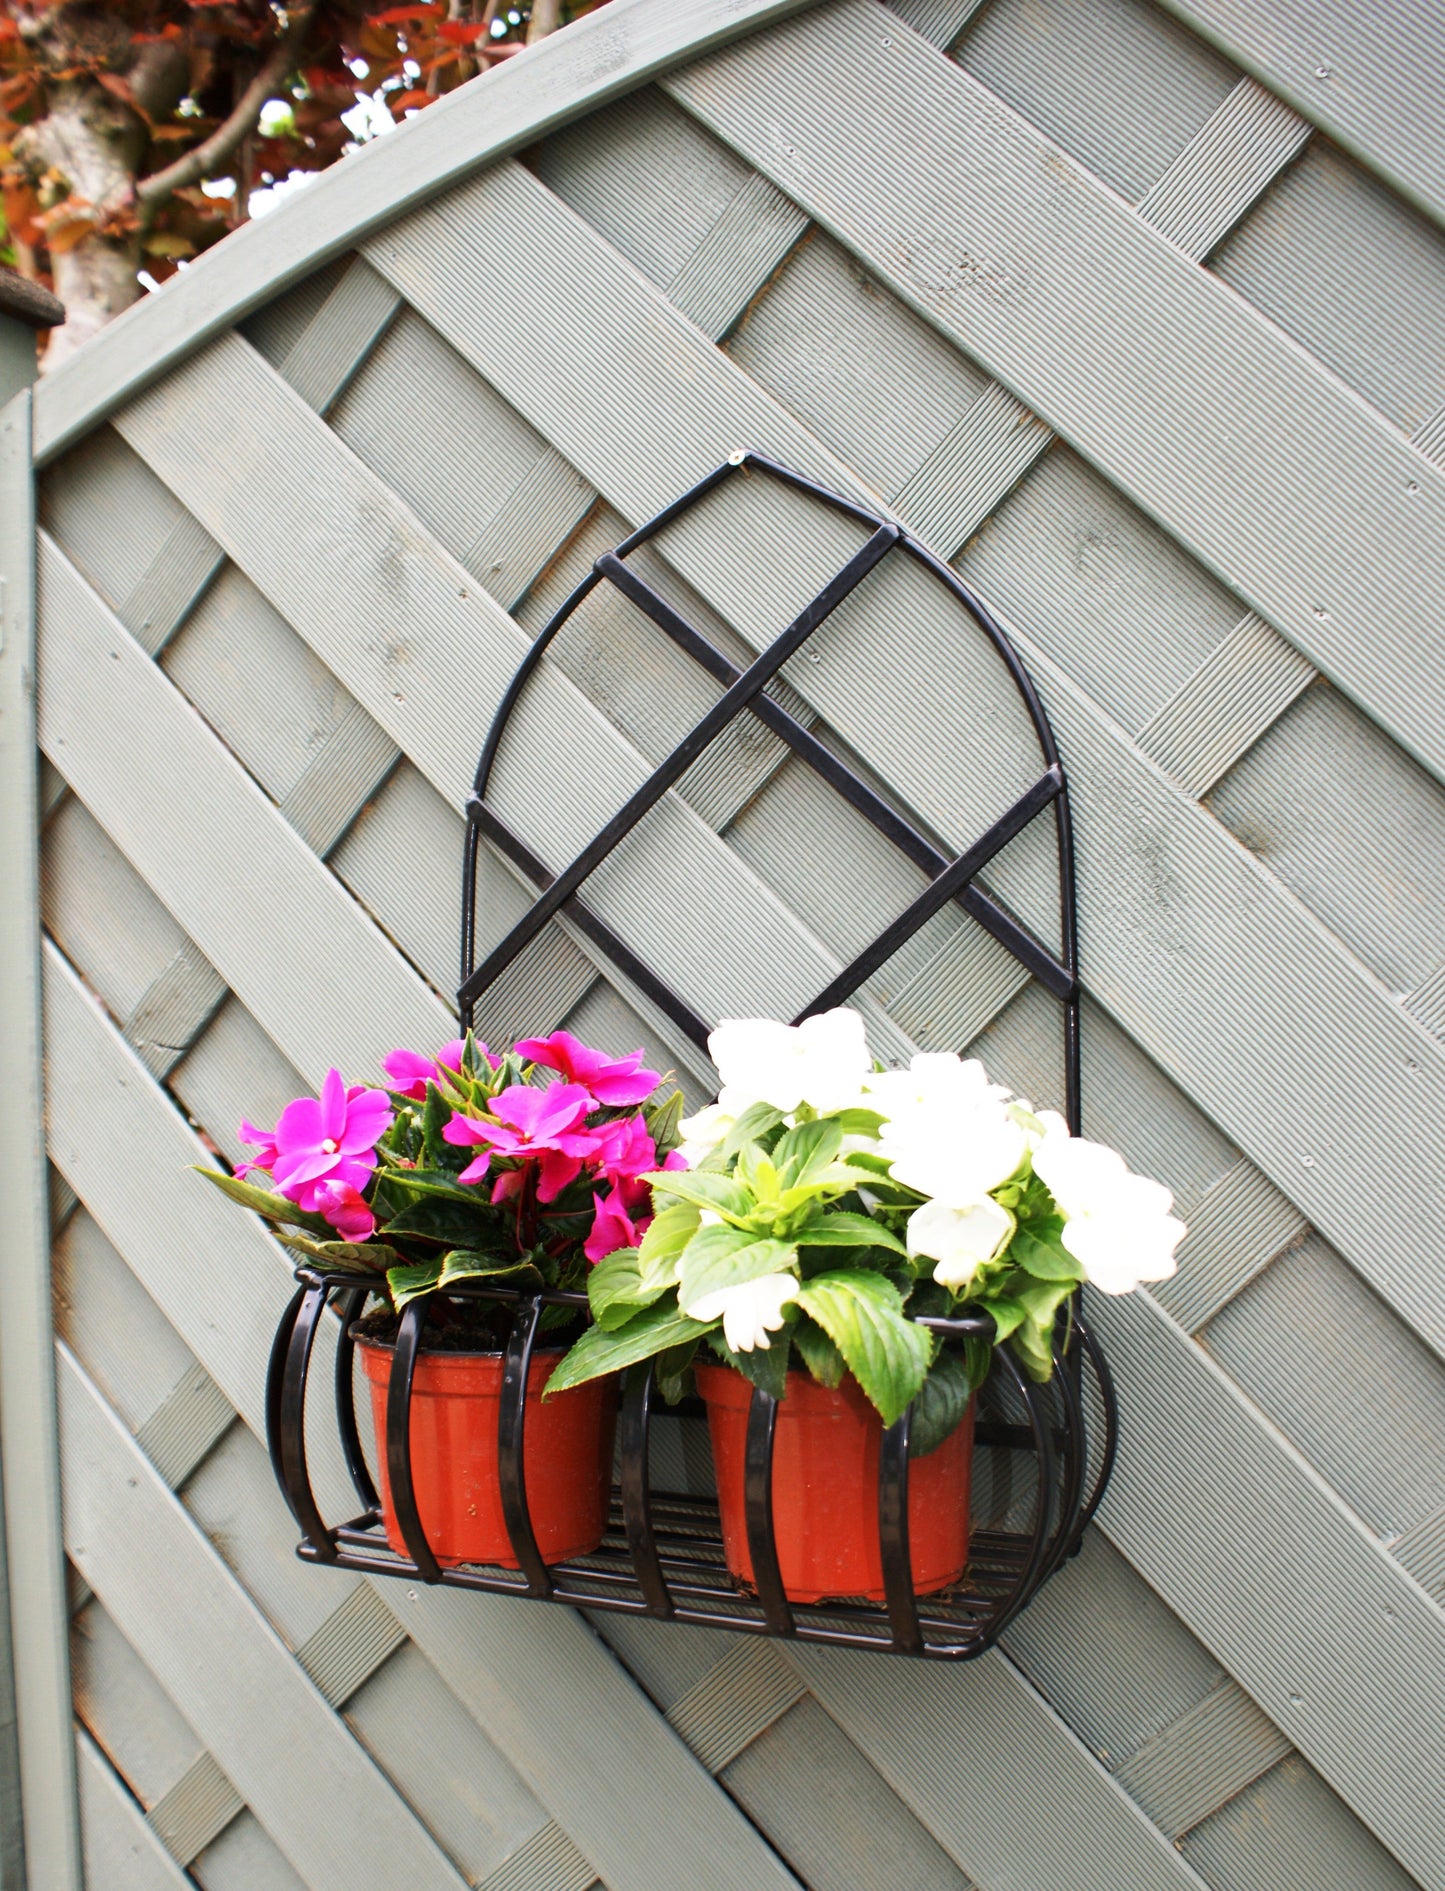 GOTHIC WALL PLANTER